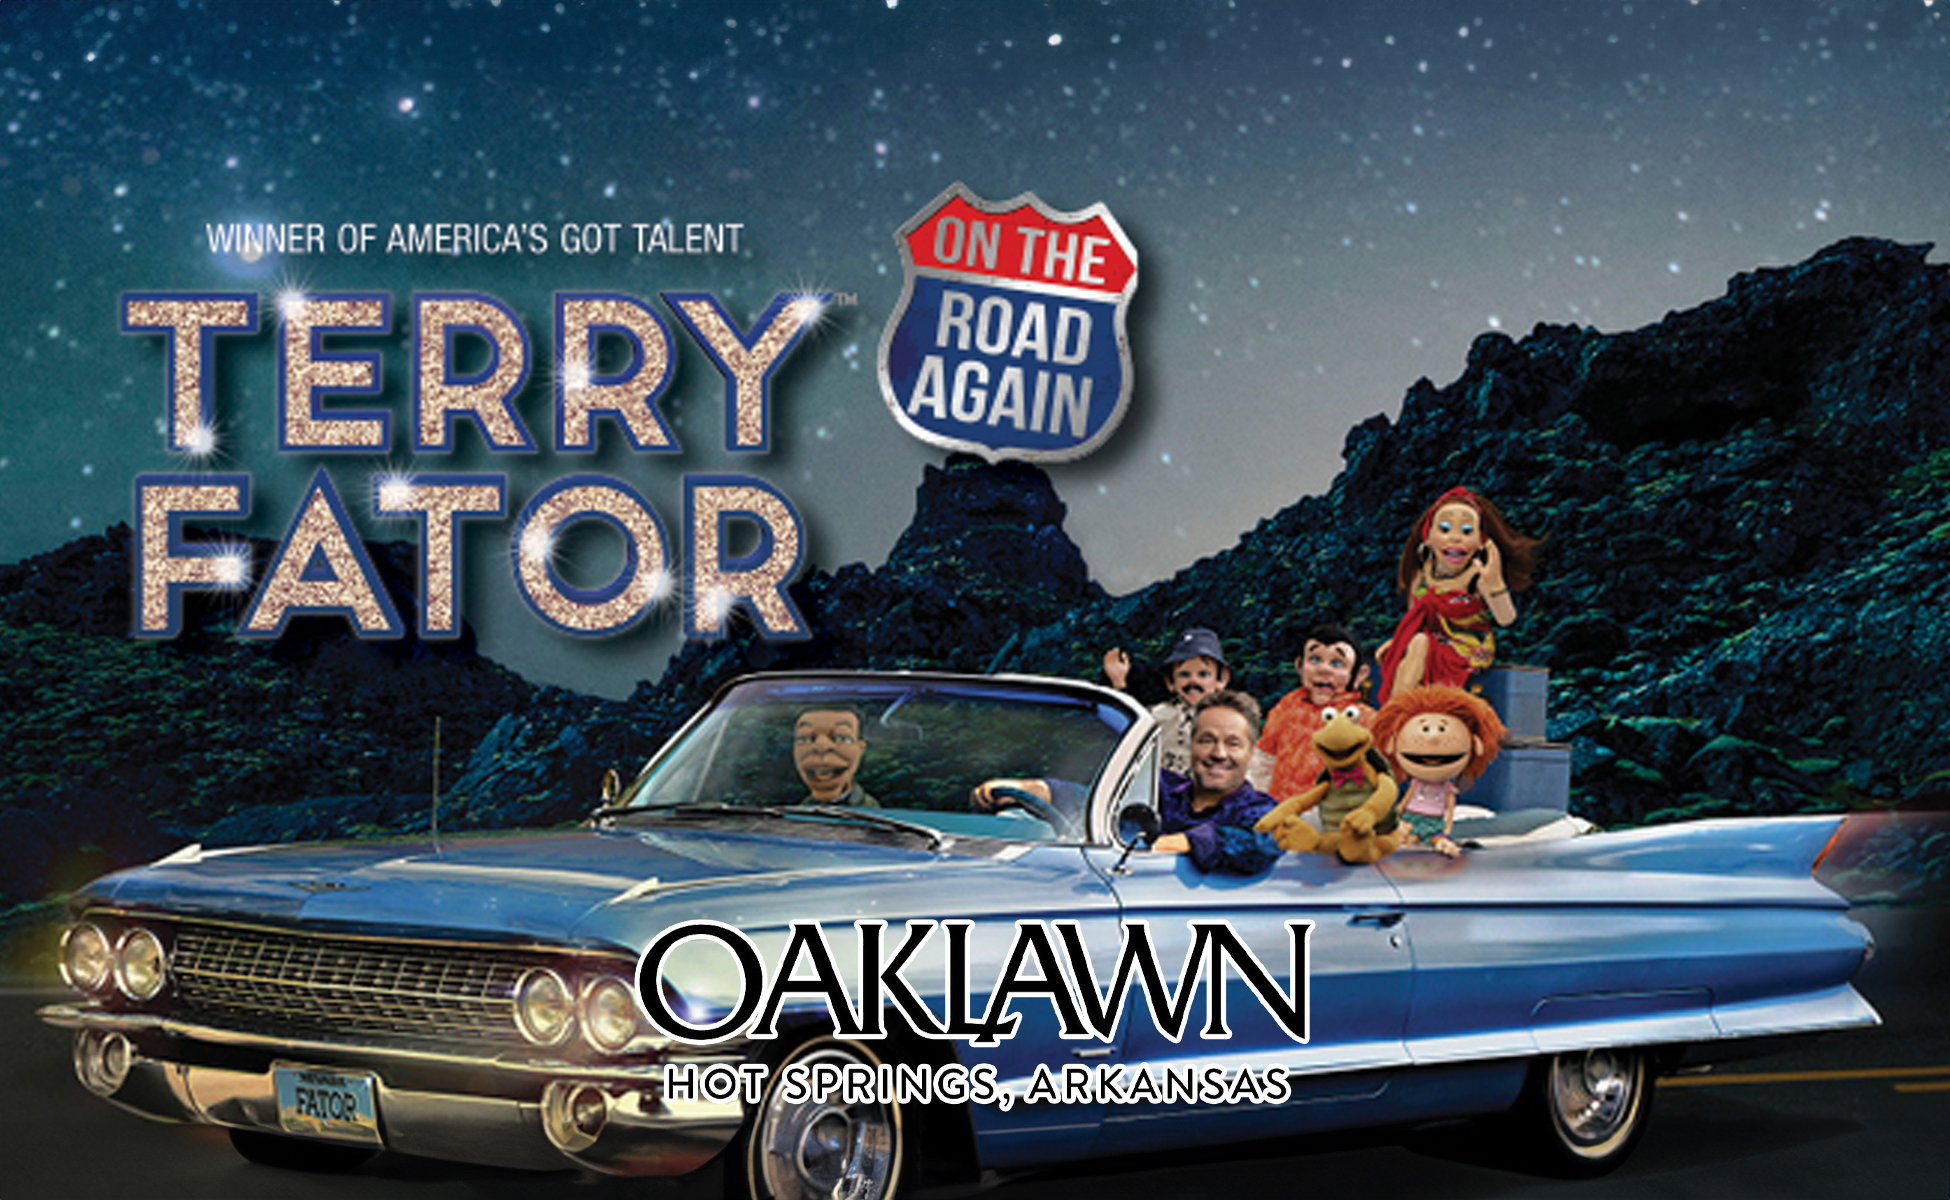 Terry Fator: On the Road Again at Oaklawn